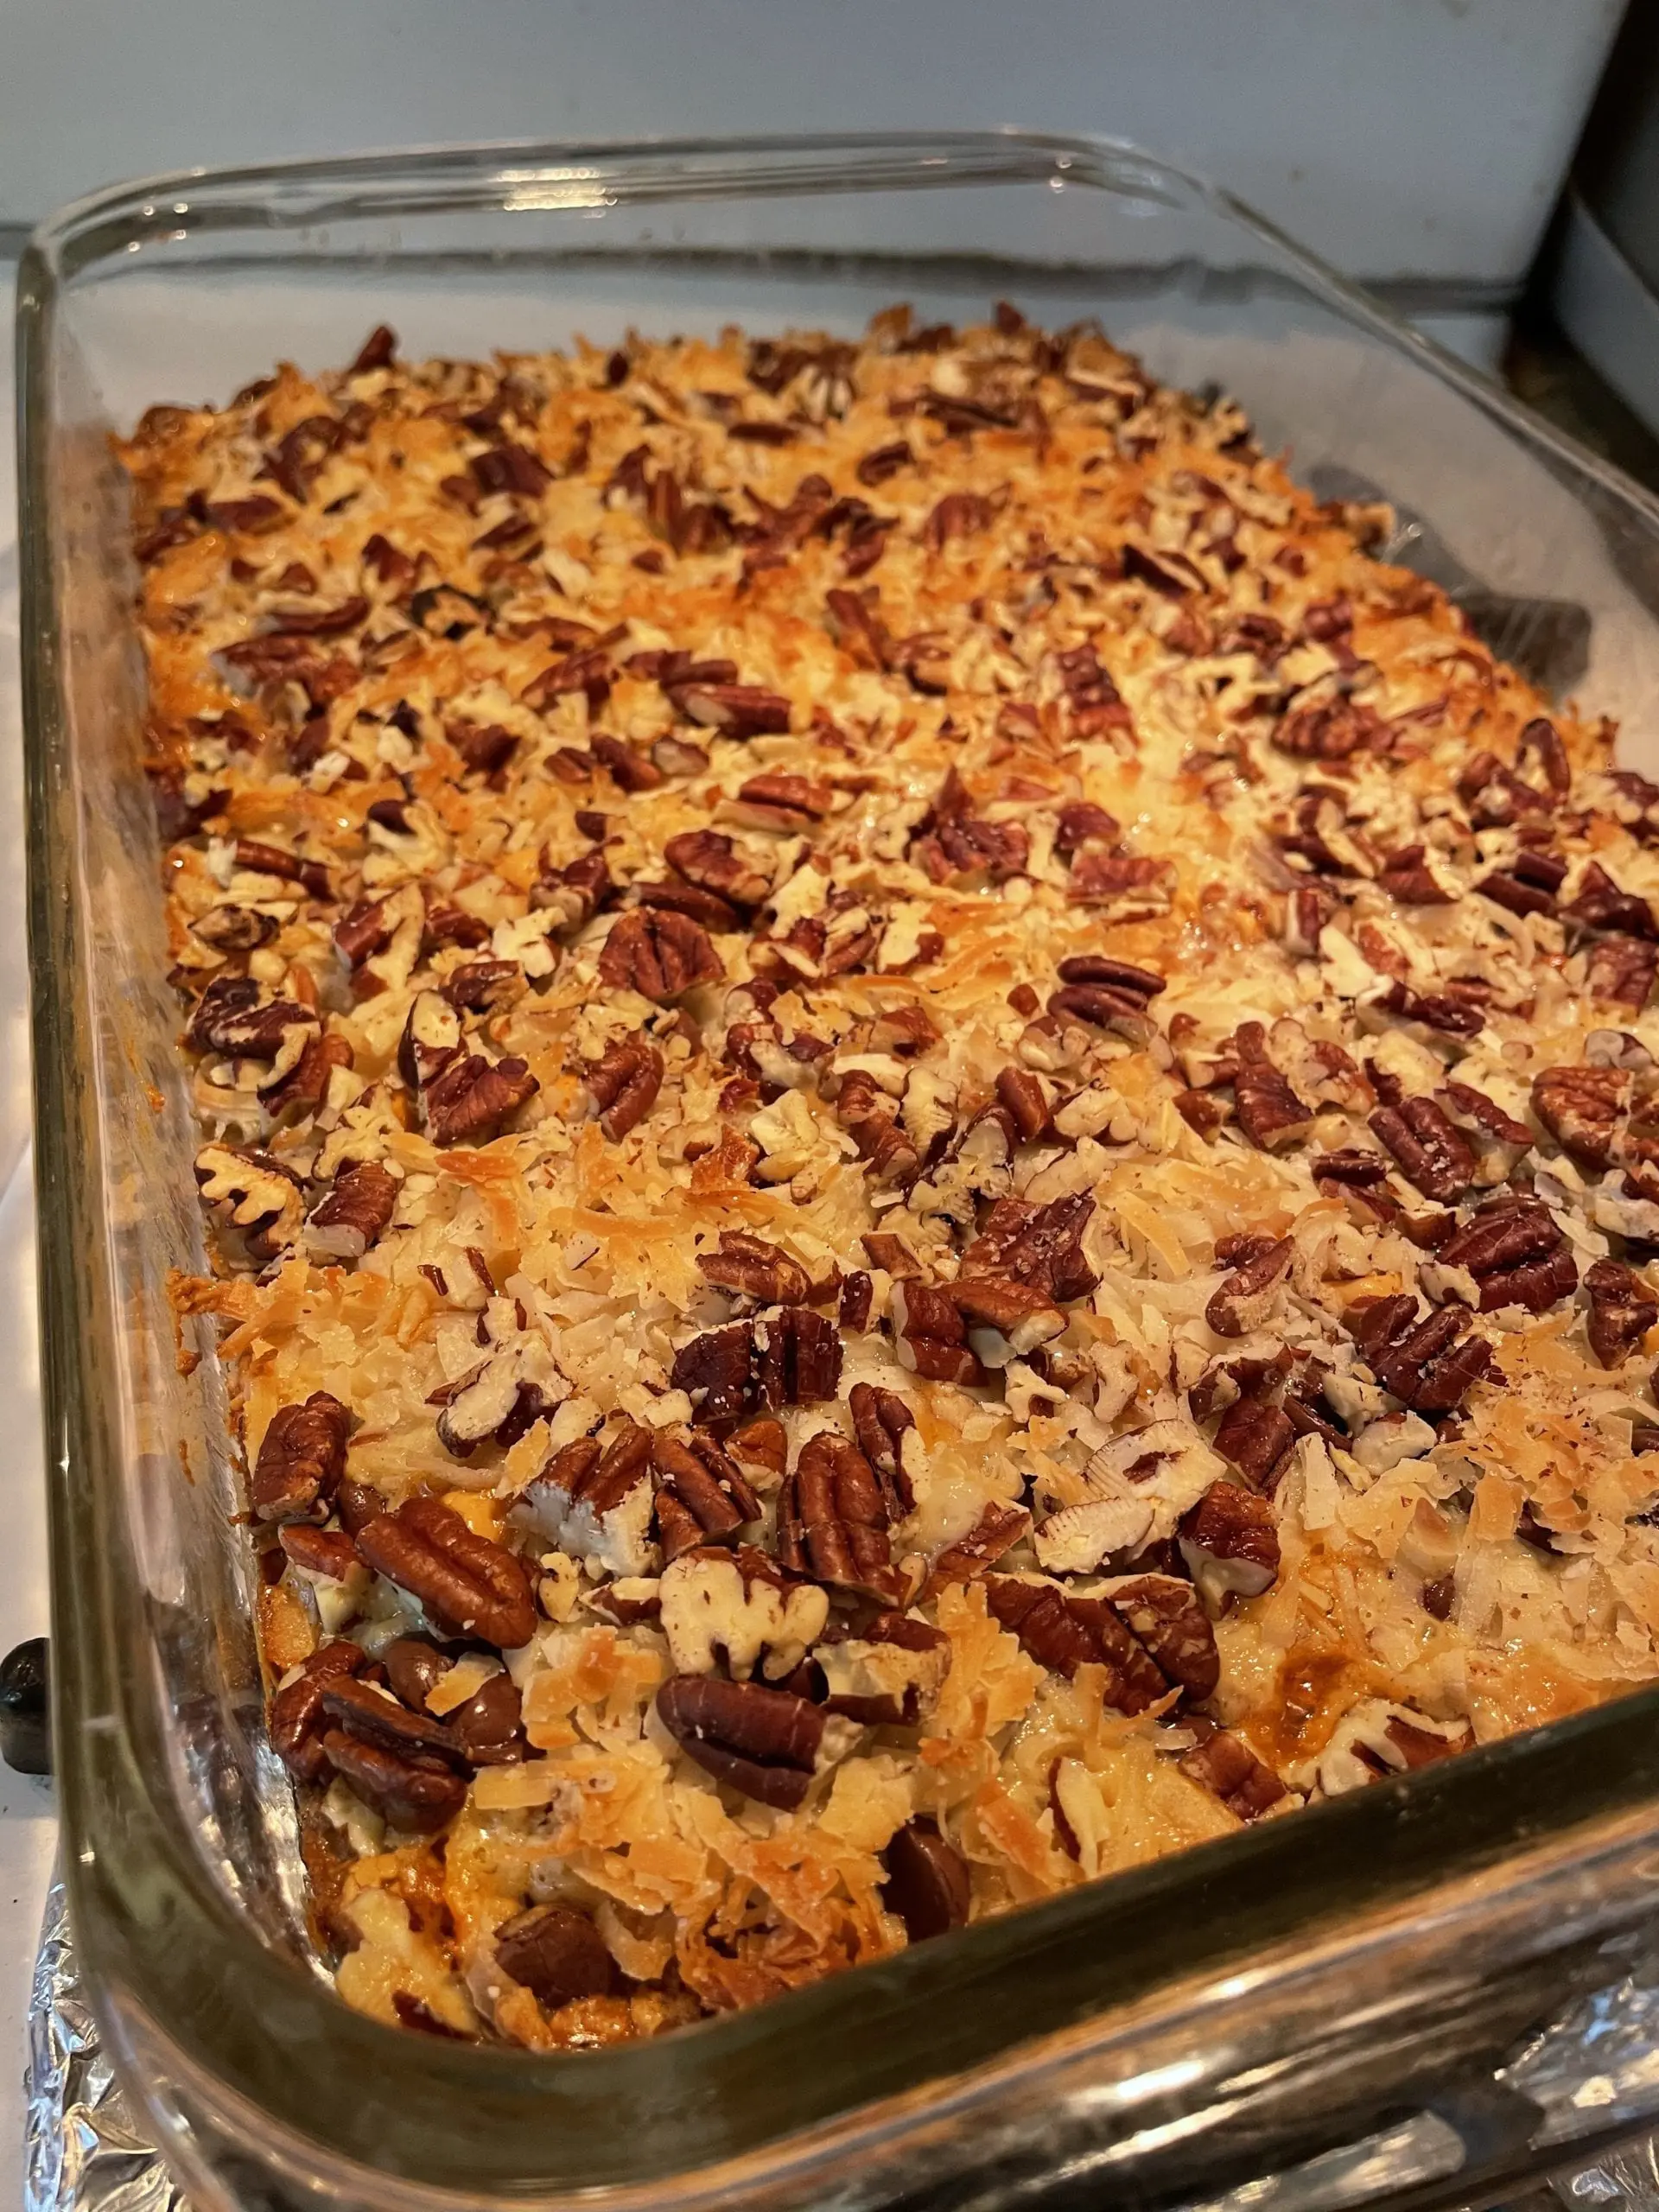 Coconut-pecan bars fresh from the oven